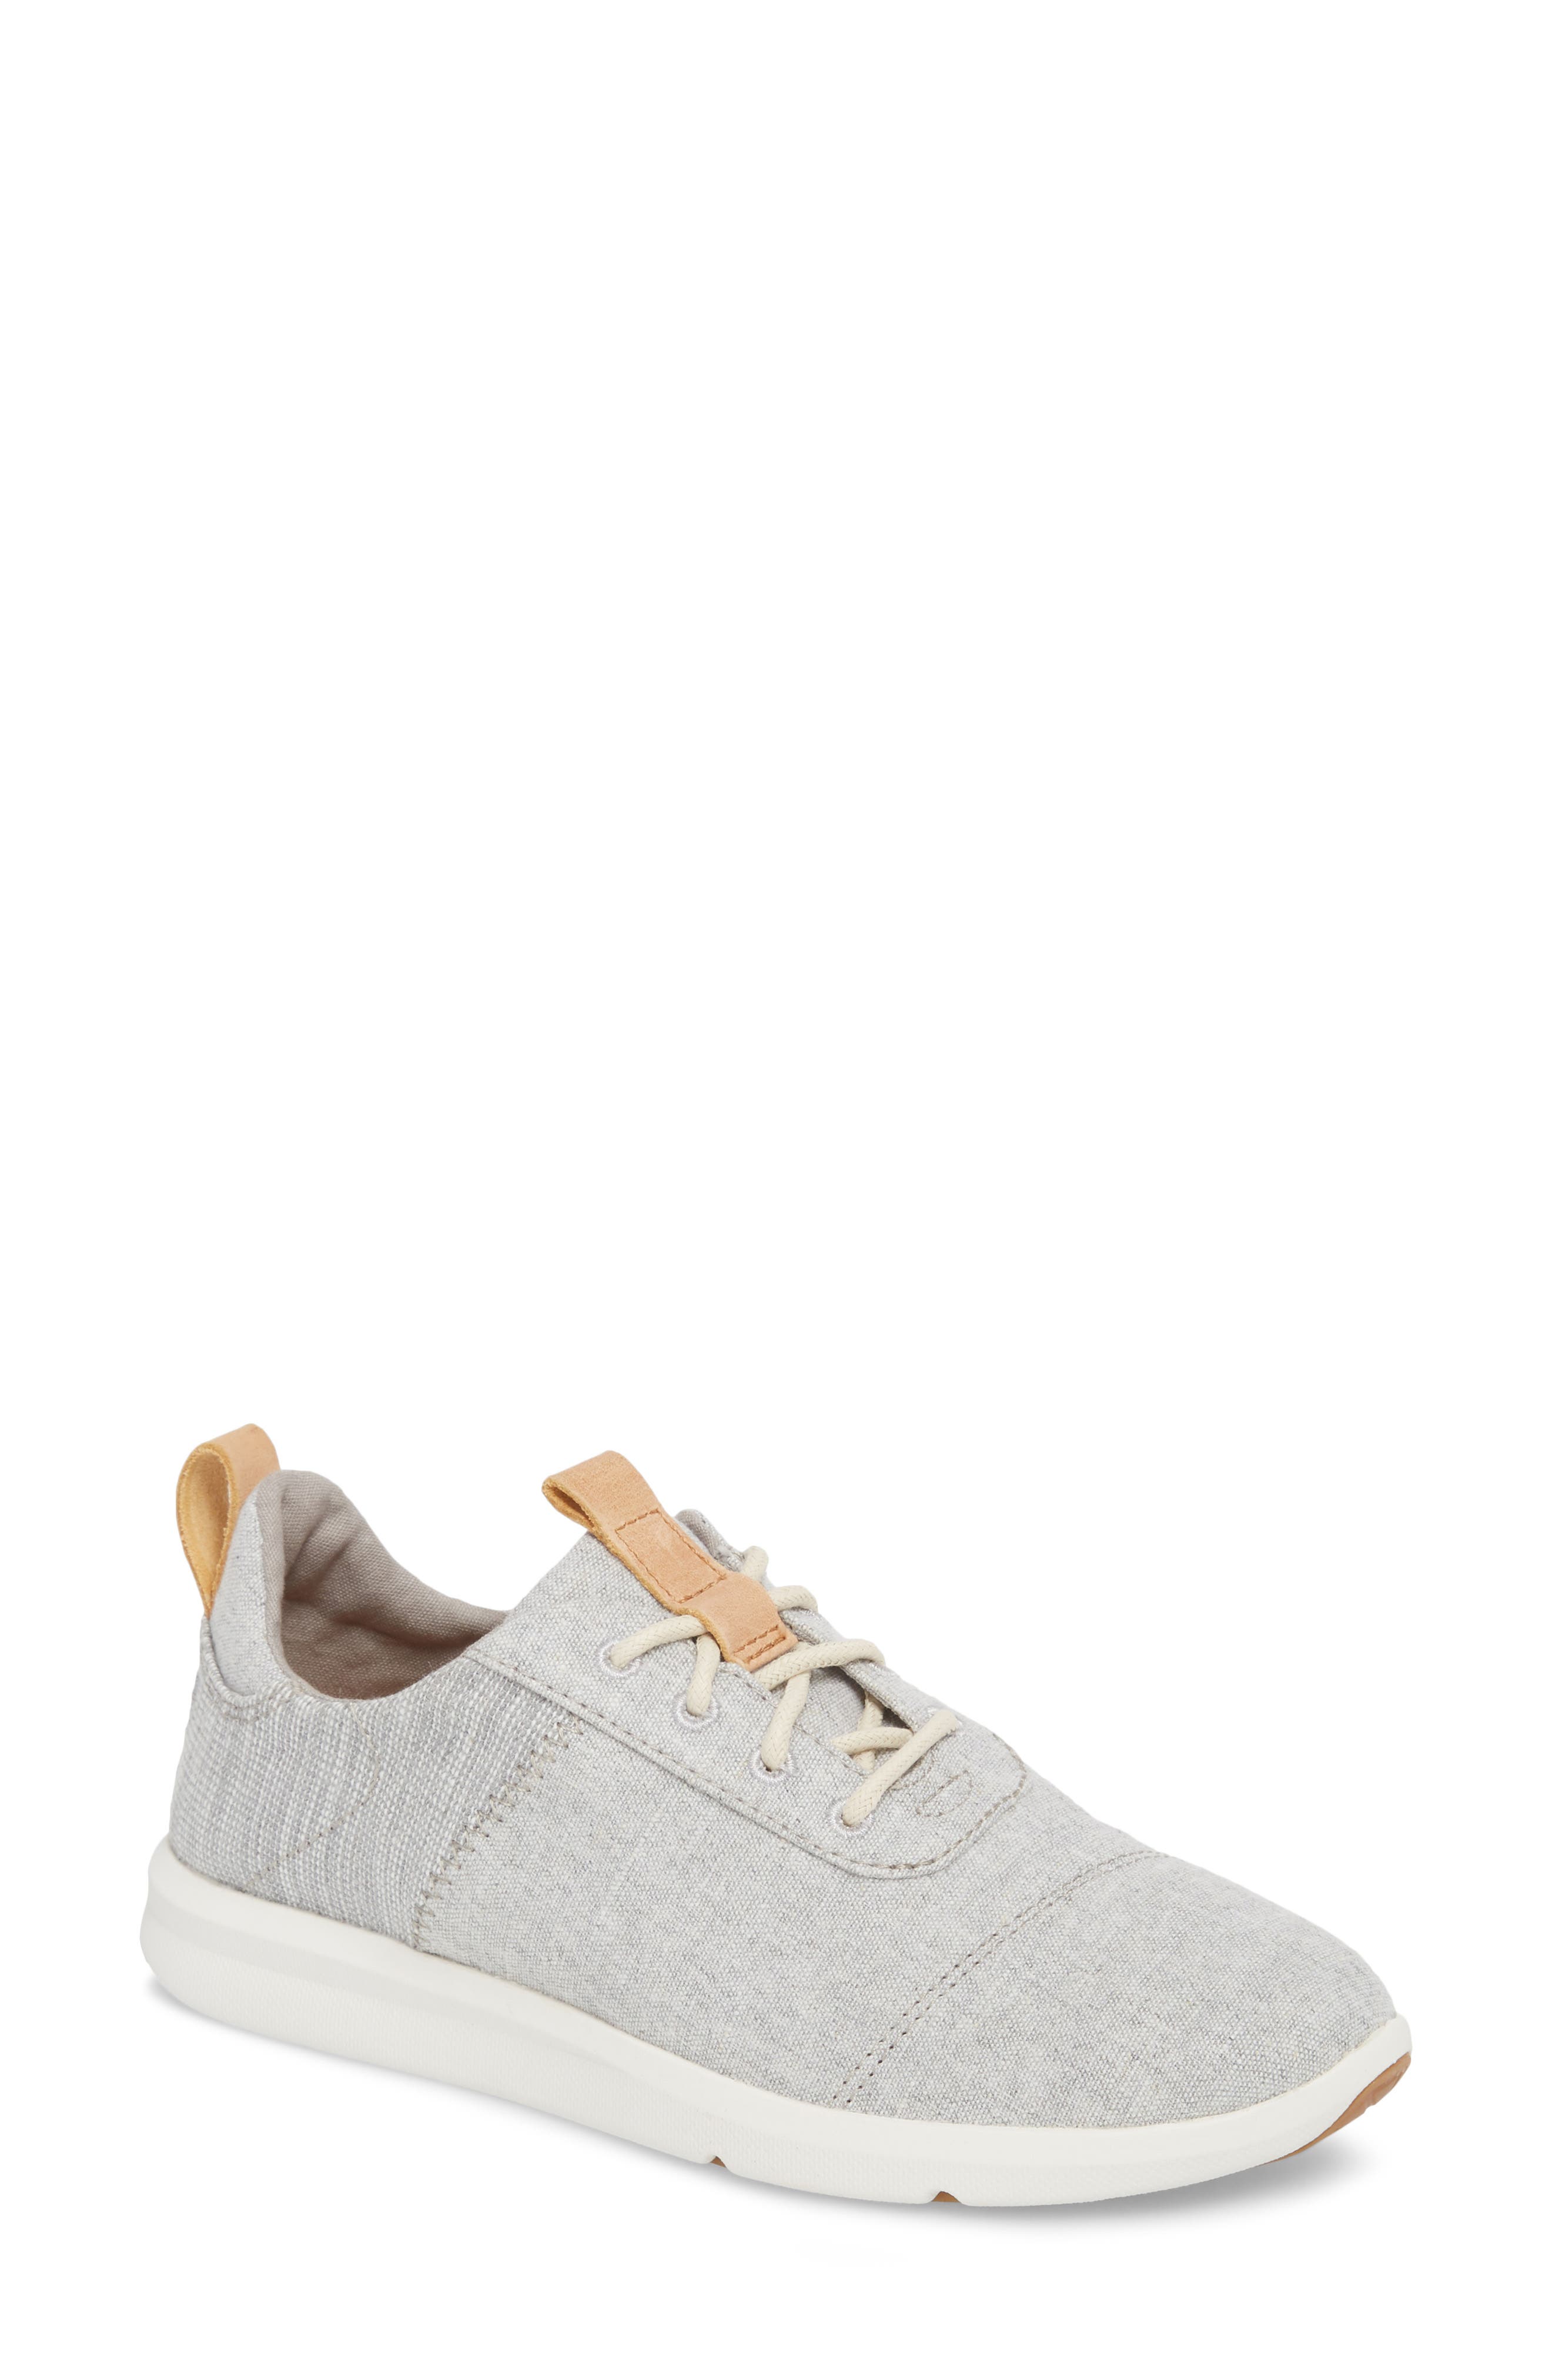 toms sneakers womens